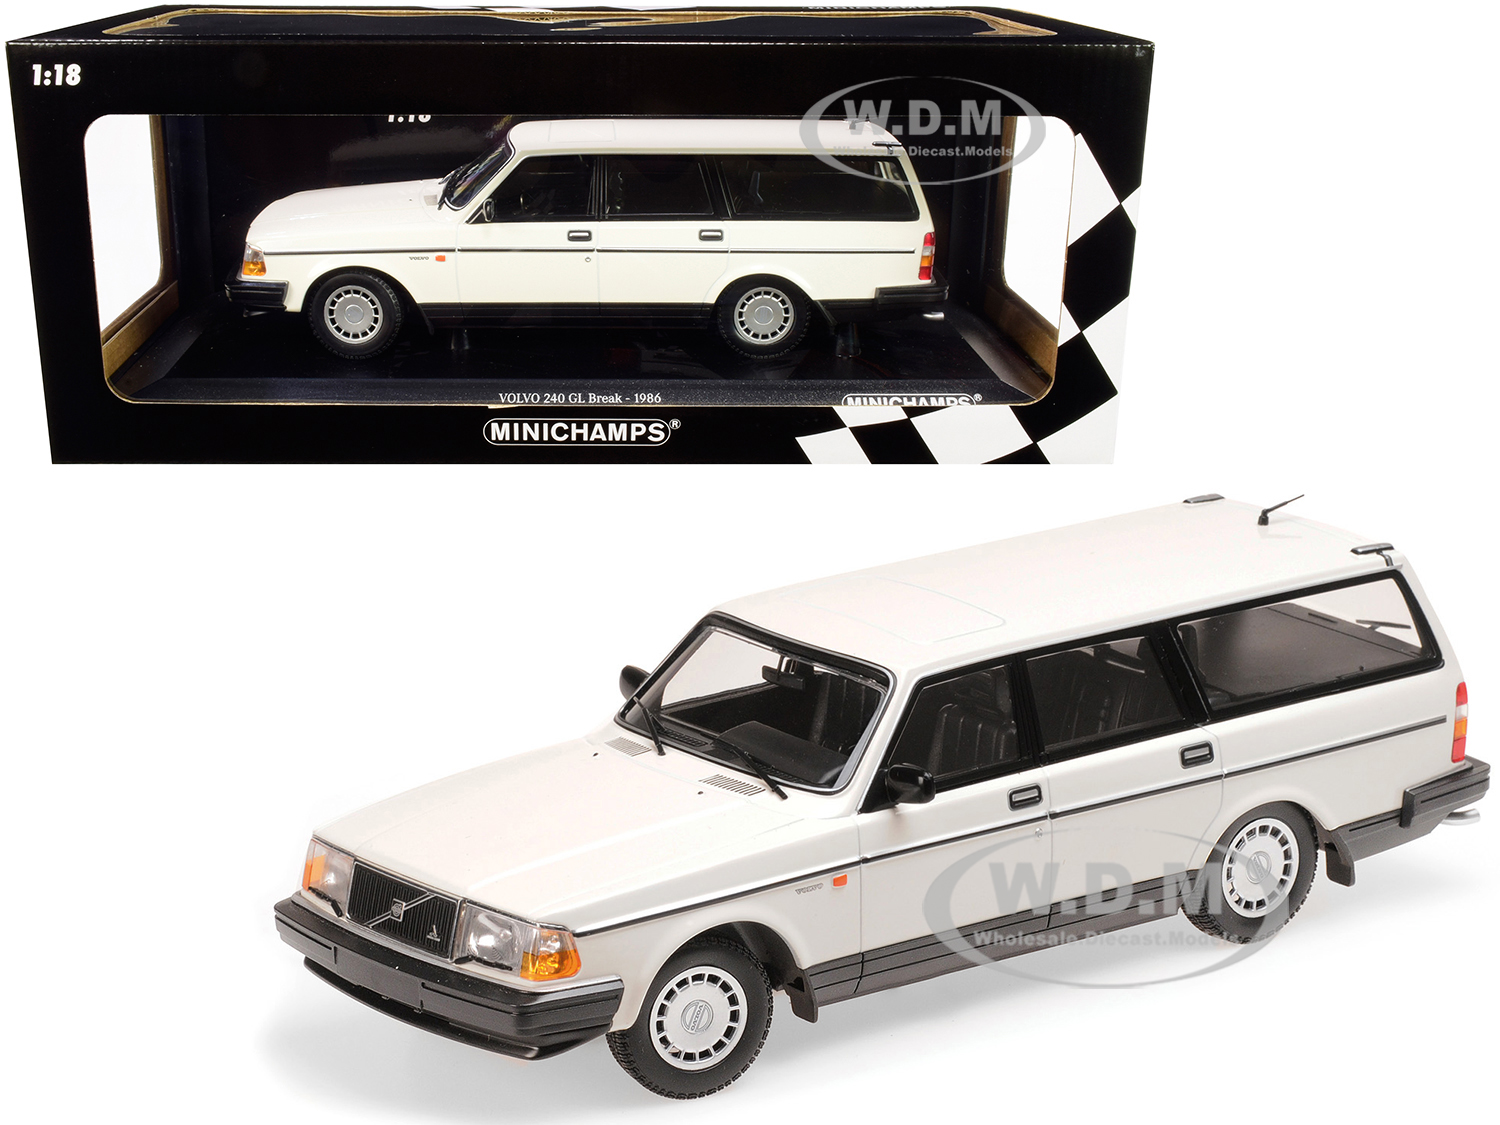 1986 Volvo 240 Gl Break White Limited Edition To 504 Pieces Worldwide 1/18 Diecast Model Car By Minichamps